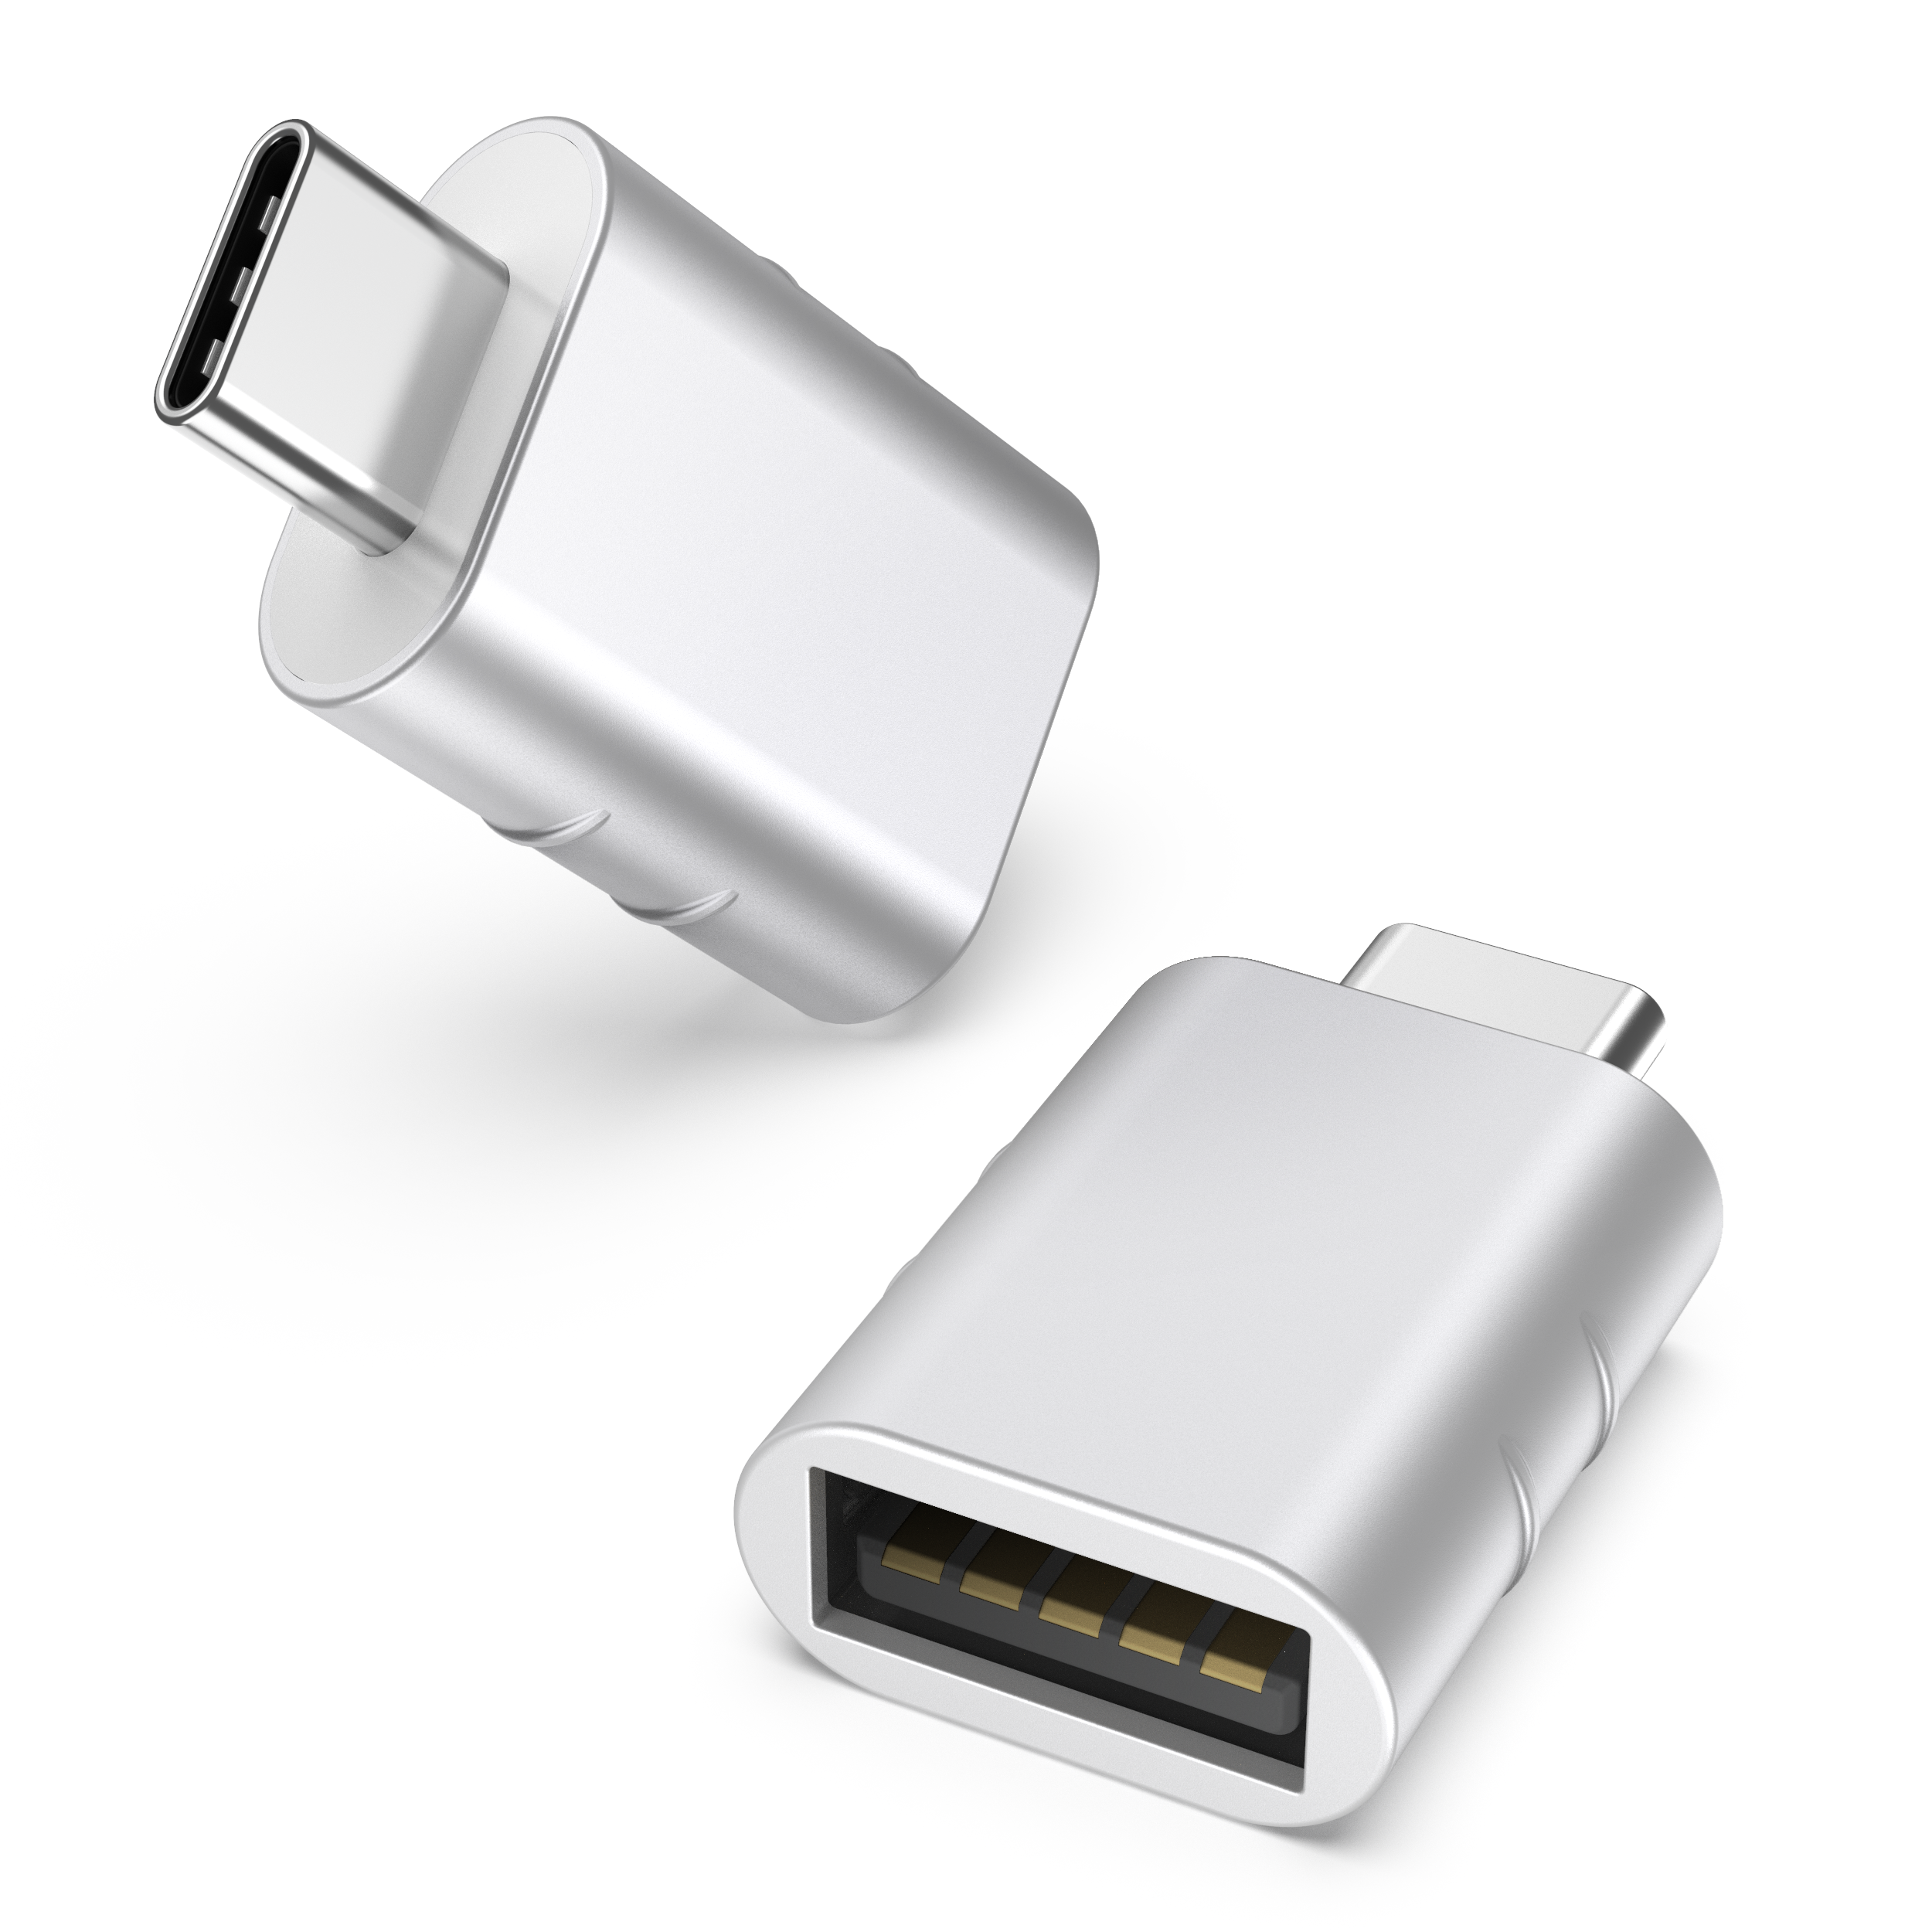 C to USB Adapter Pack of 2 USB C Male to USB3 Female Adapter